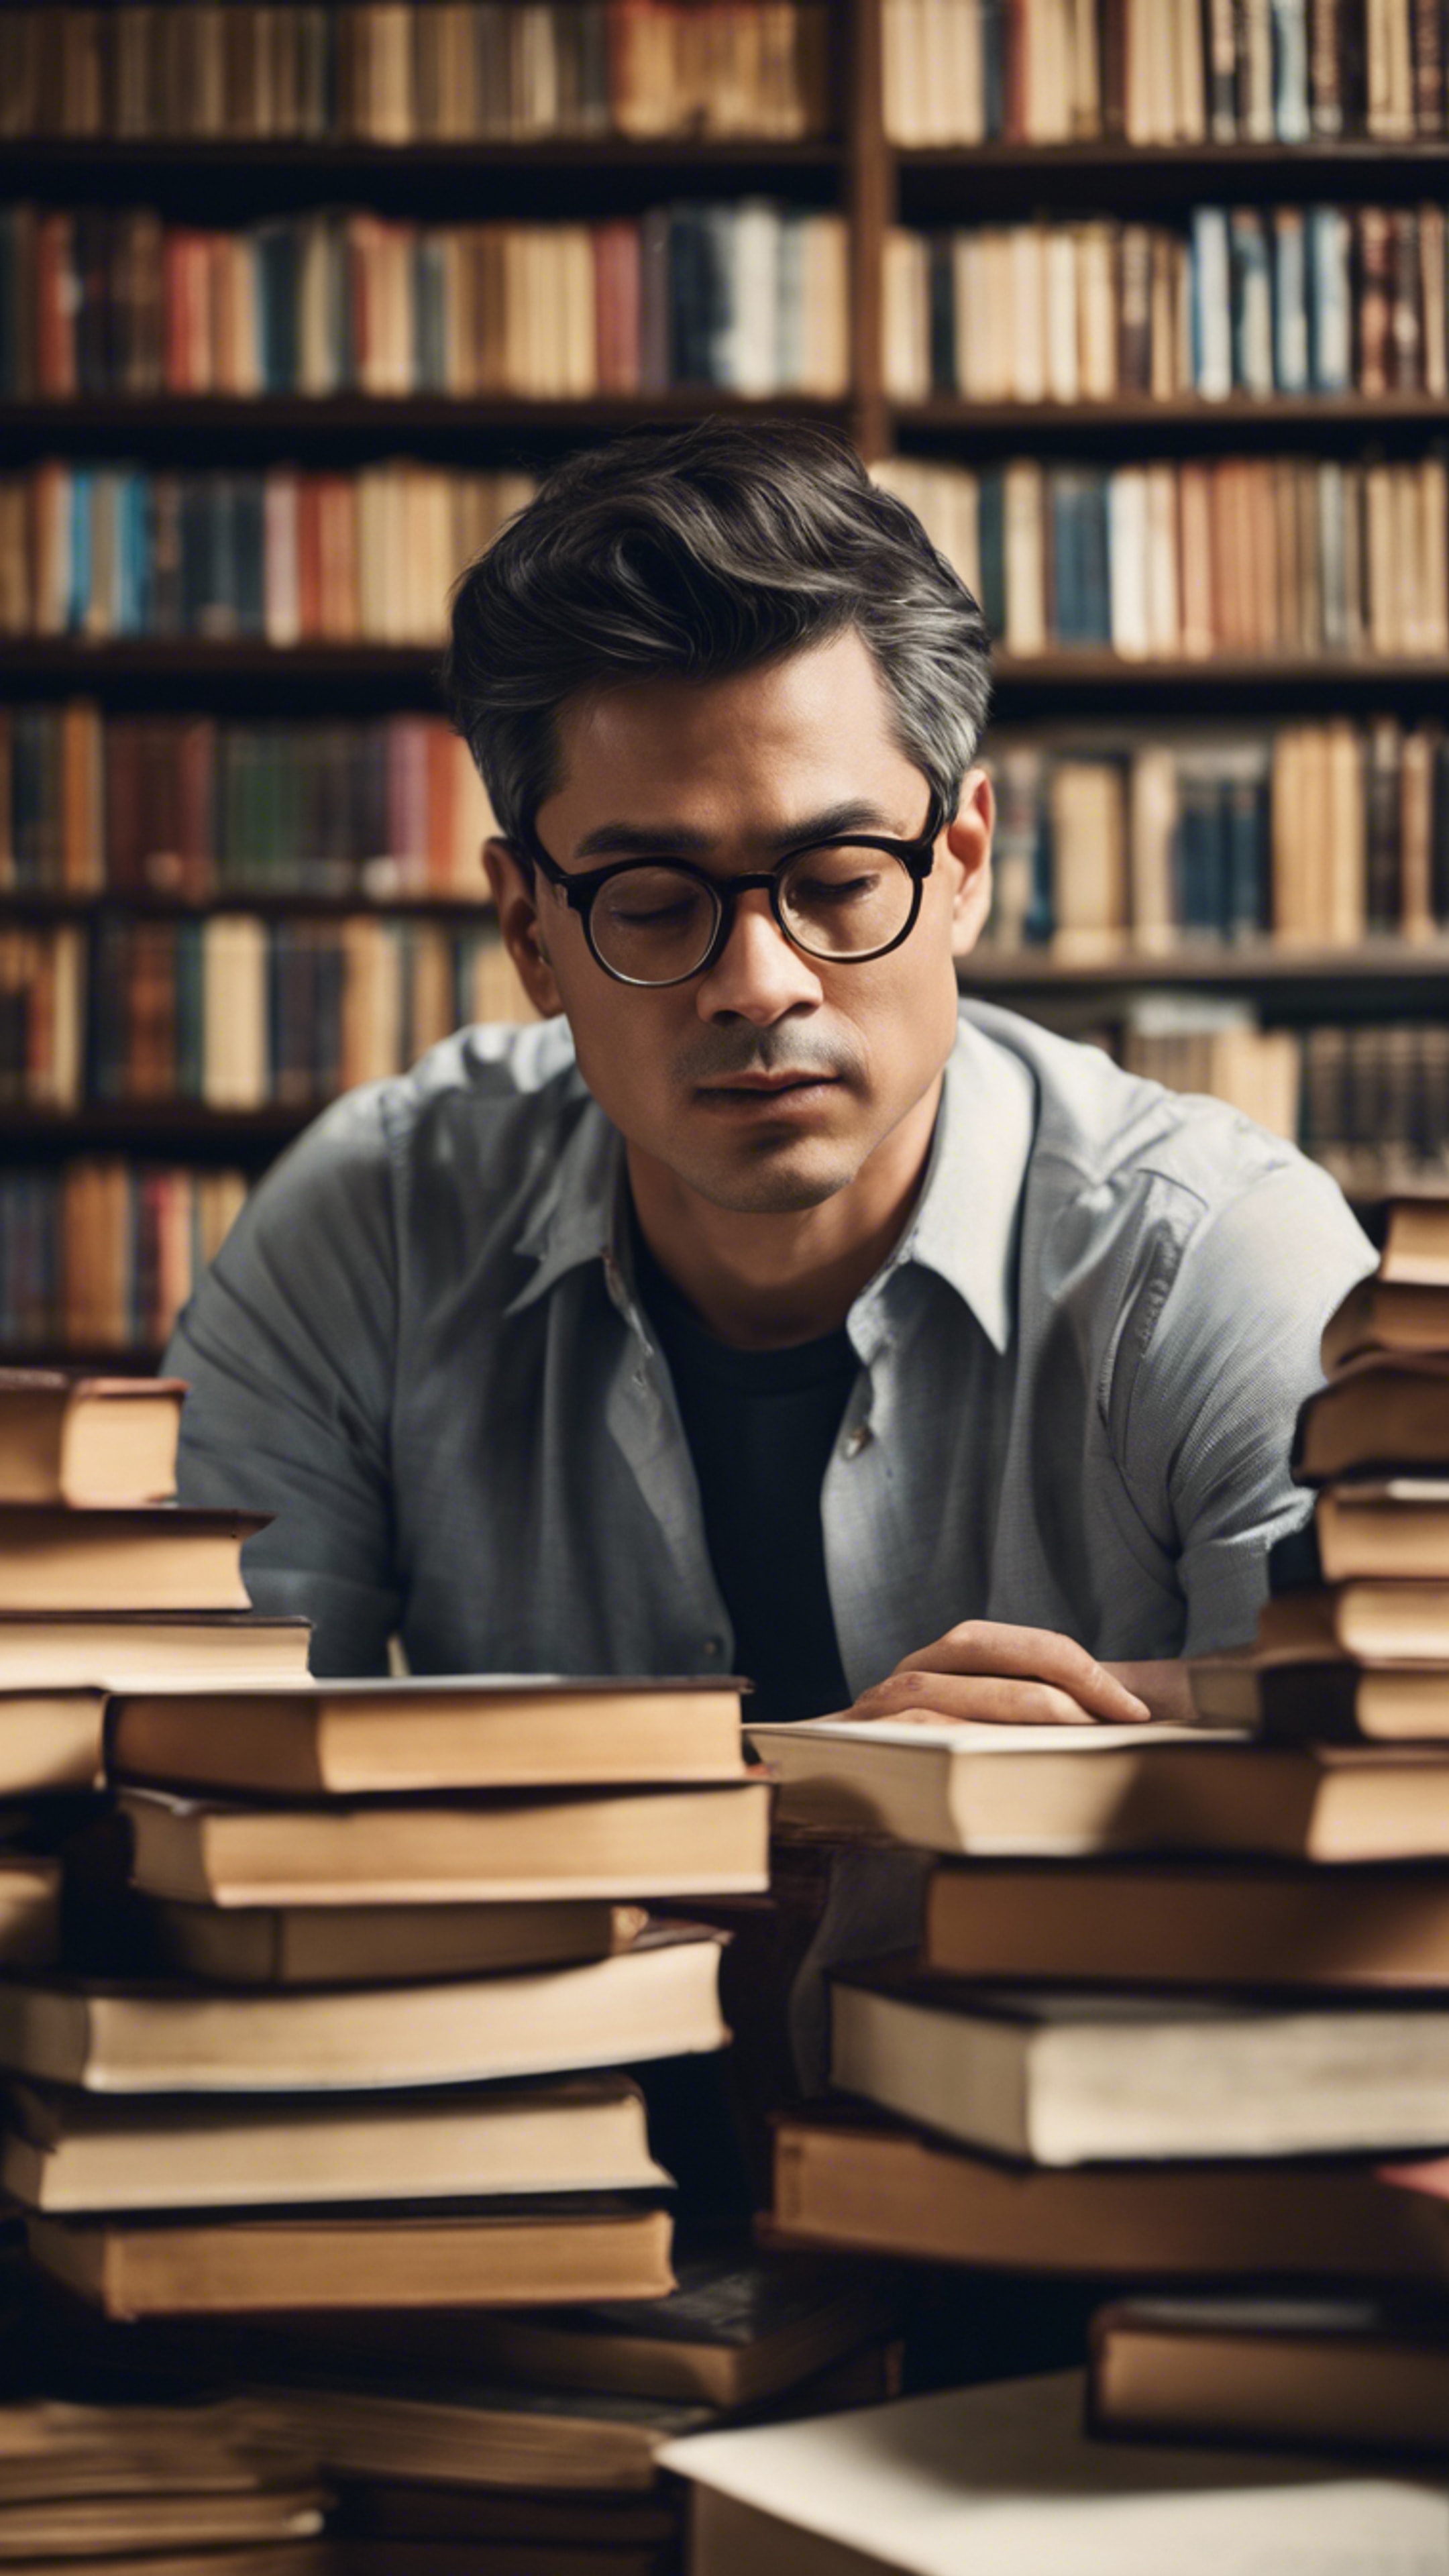 An intelligent man in glasses, deeply engrossed in his studies surrounded by stacks of books in a quiet library. Kertas dinding[88f4531613da45079a41]